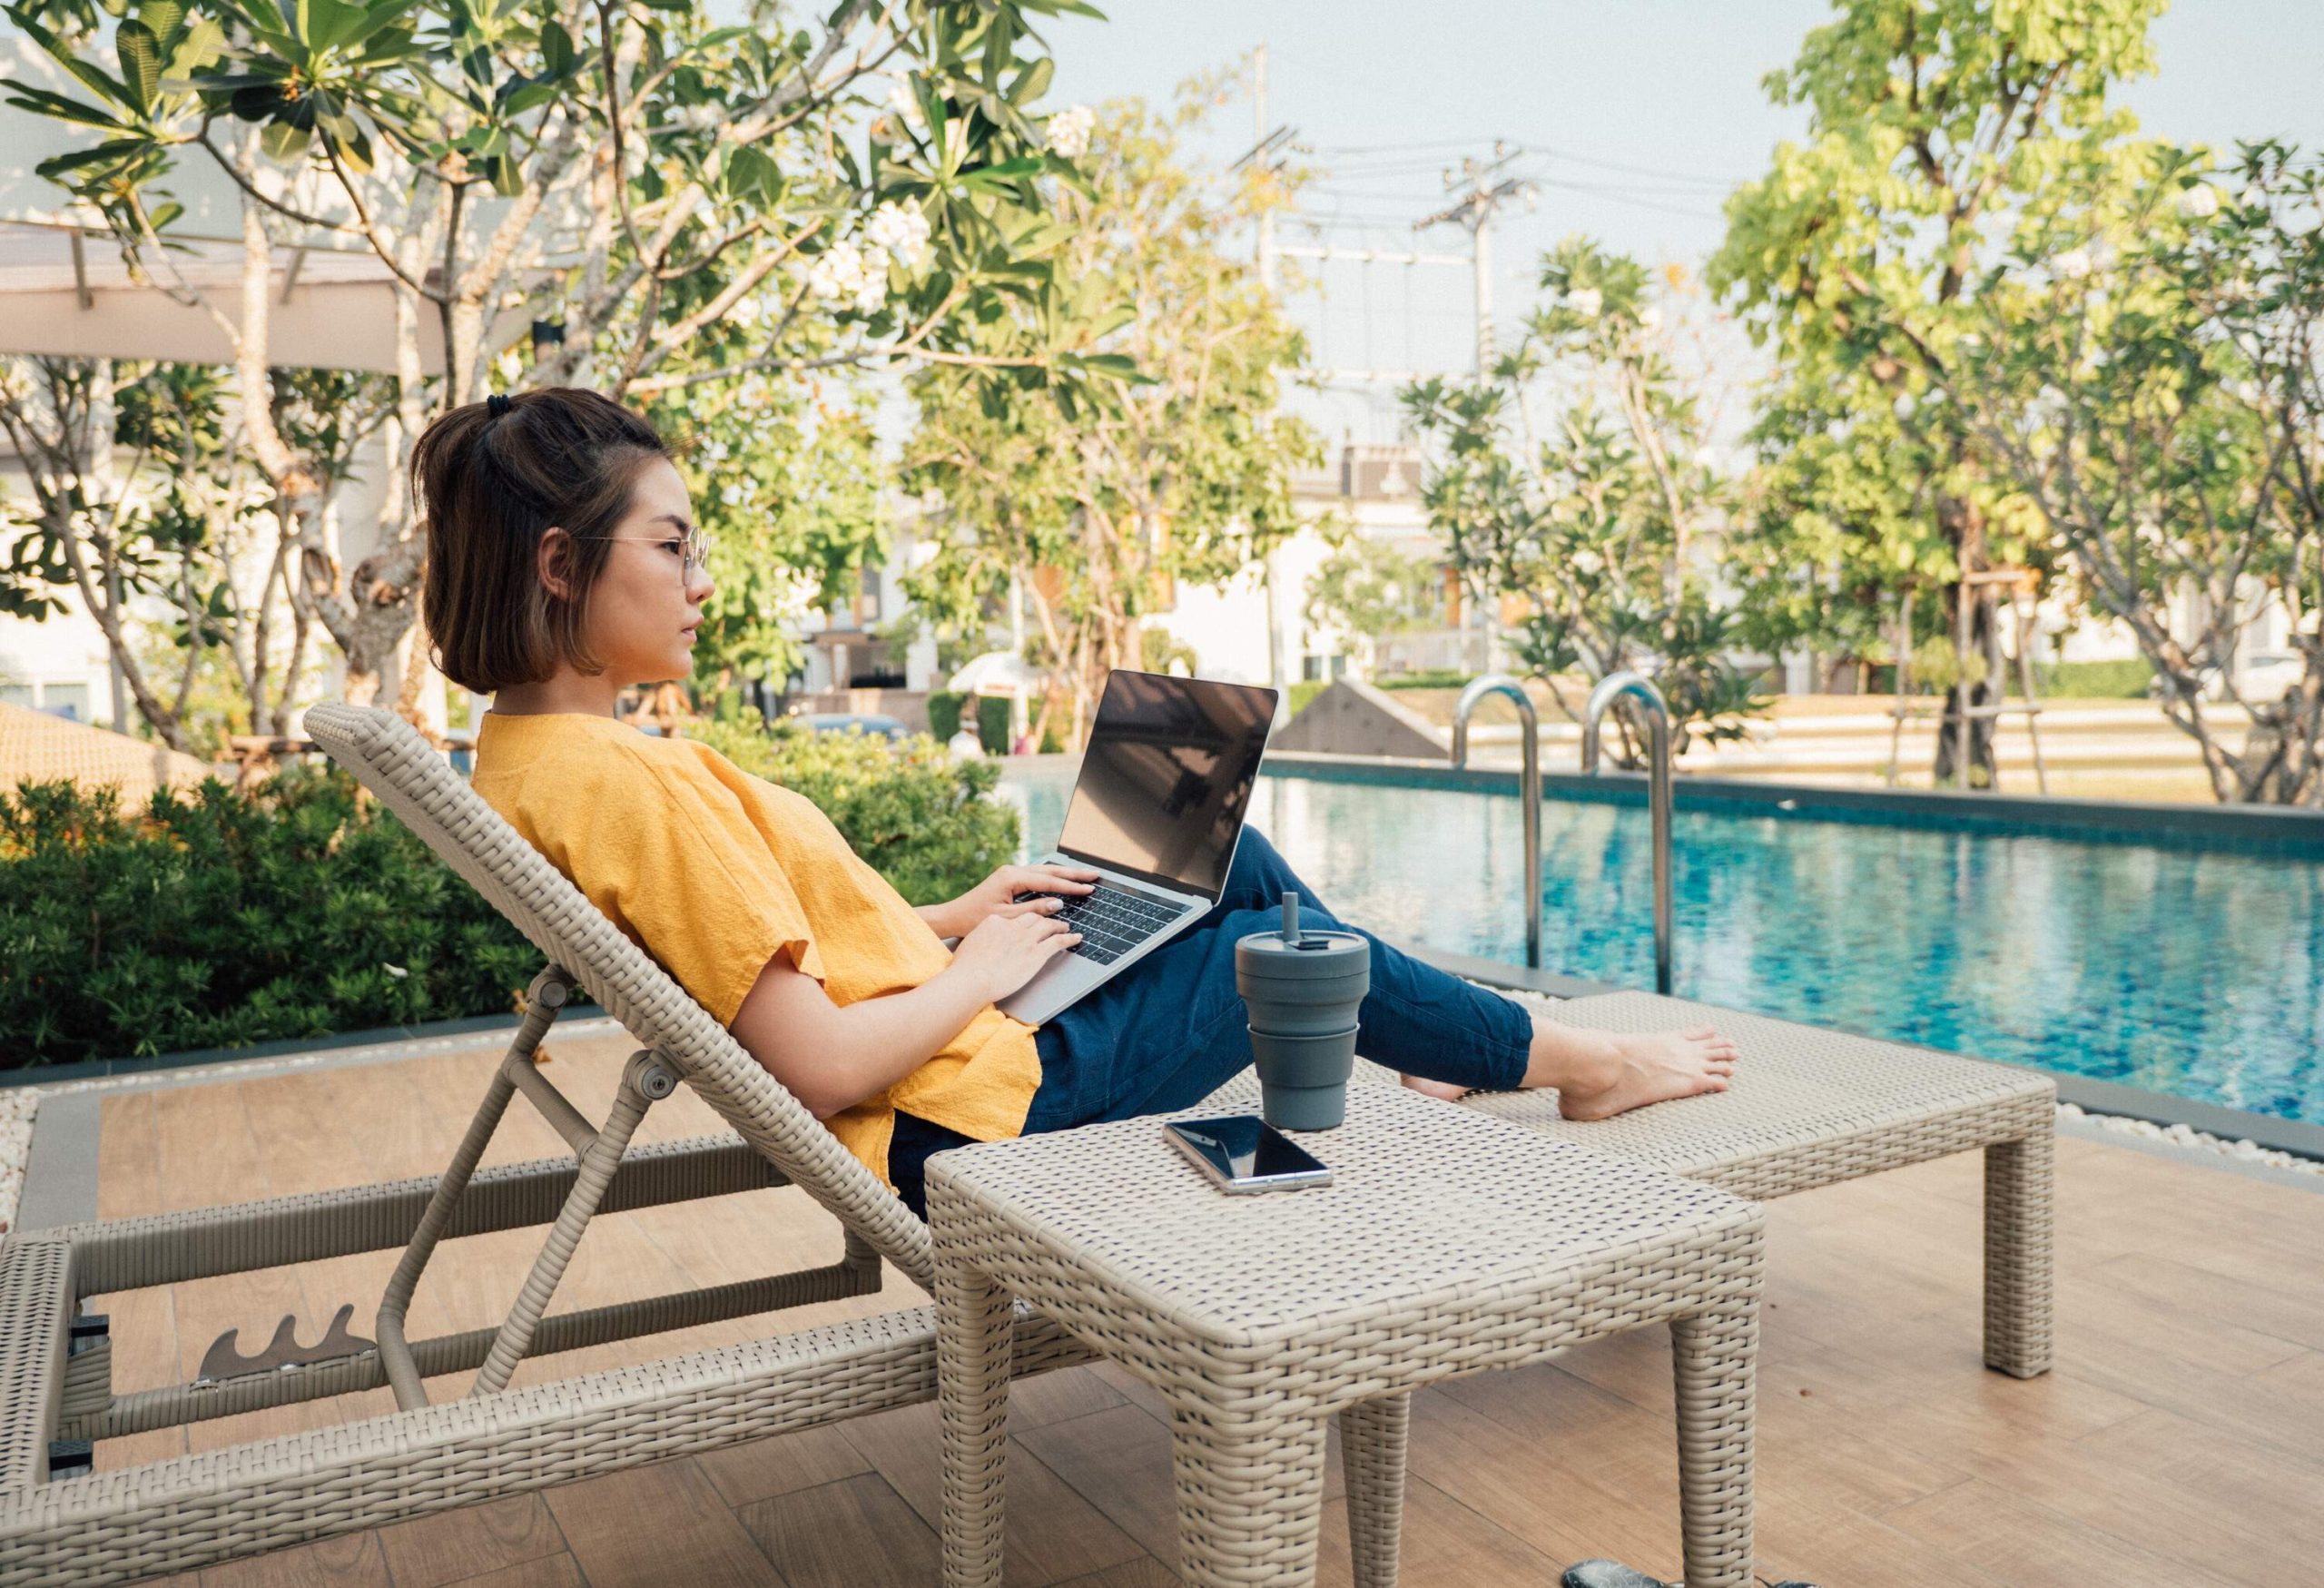 A young woman sitting on a lounge chair by the pool with her laptop on her lap.